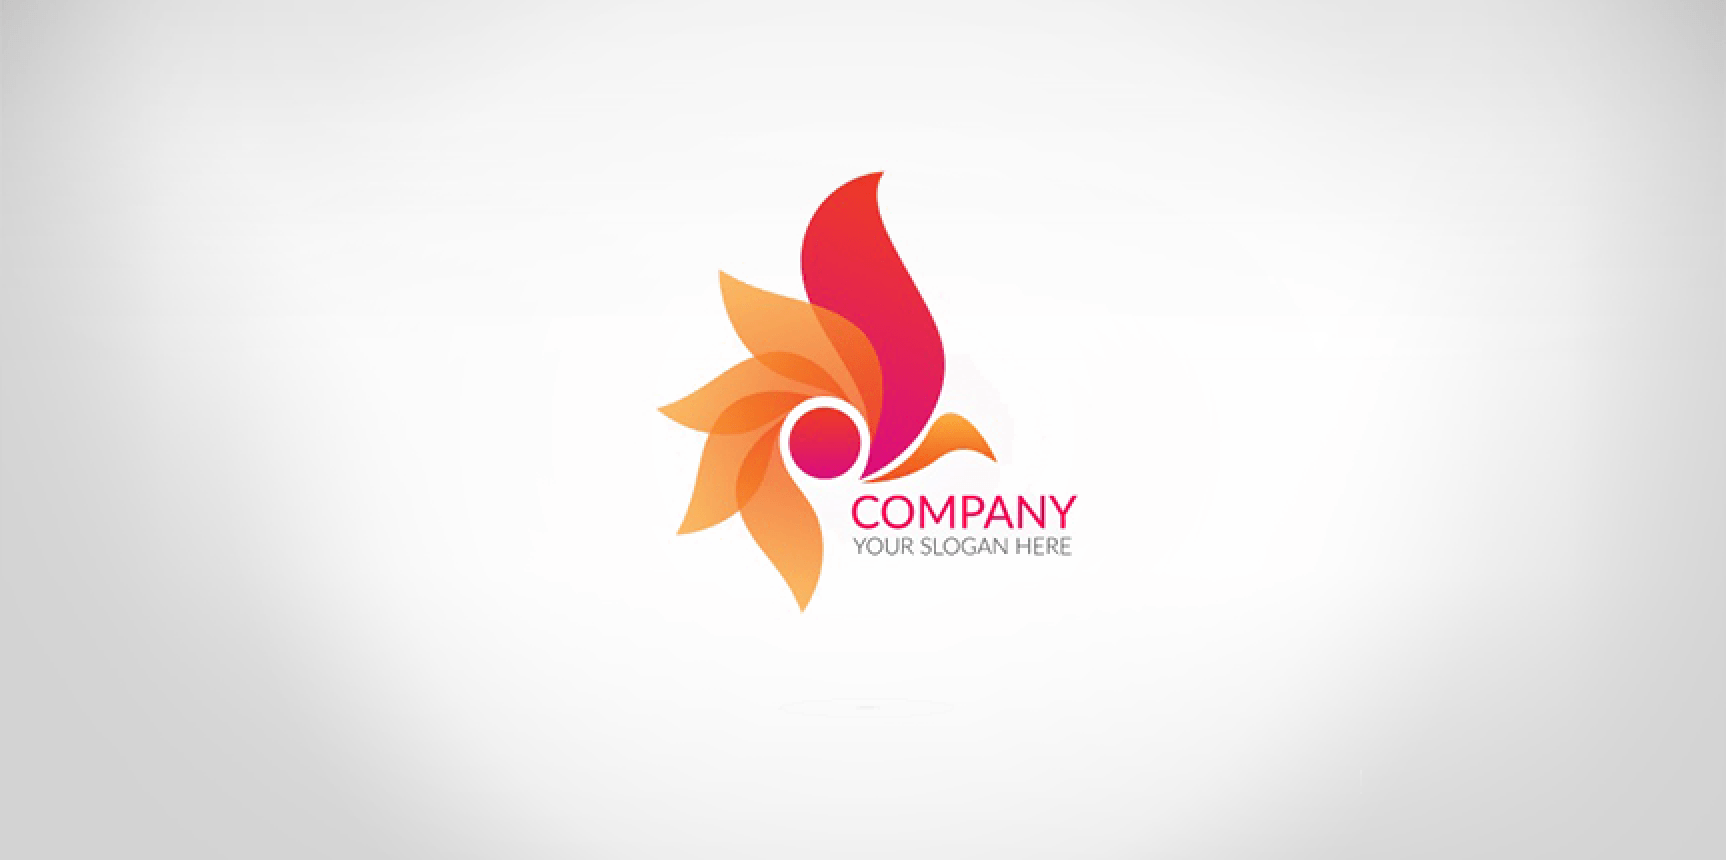 Orange Industry Logo - High Growth Company Logos Have These Attributes In Common